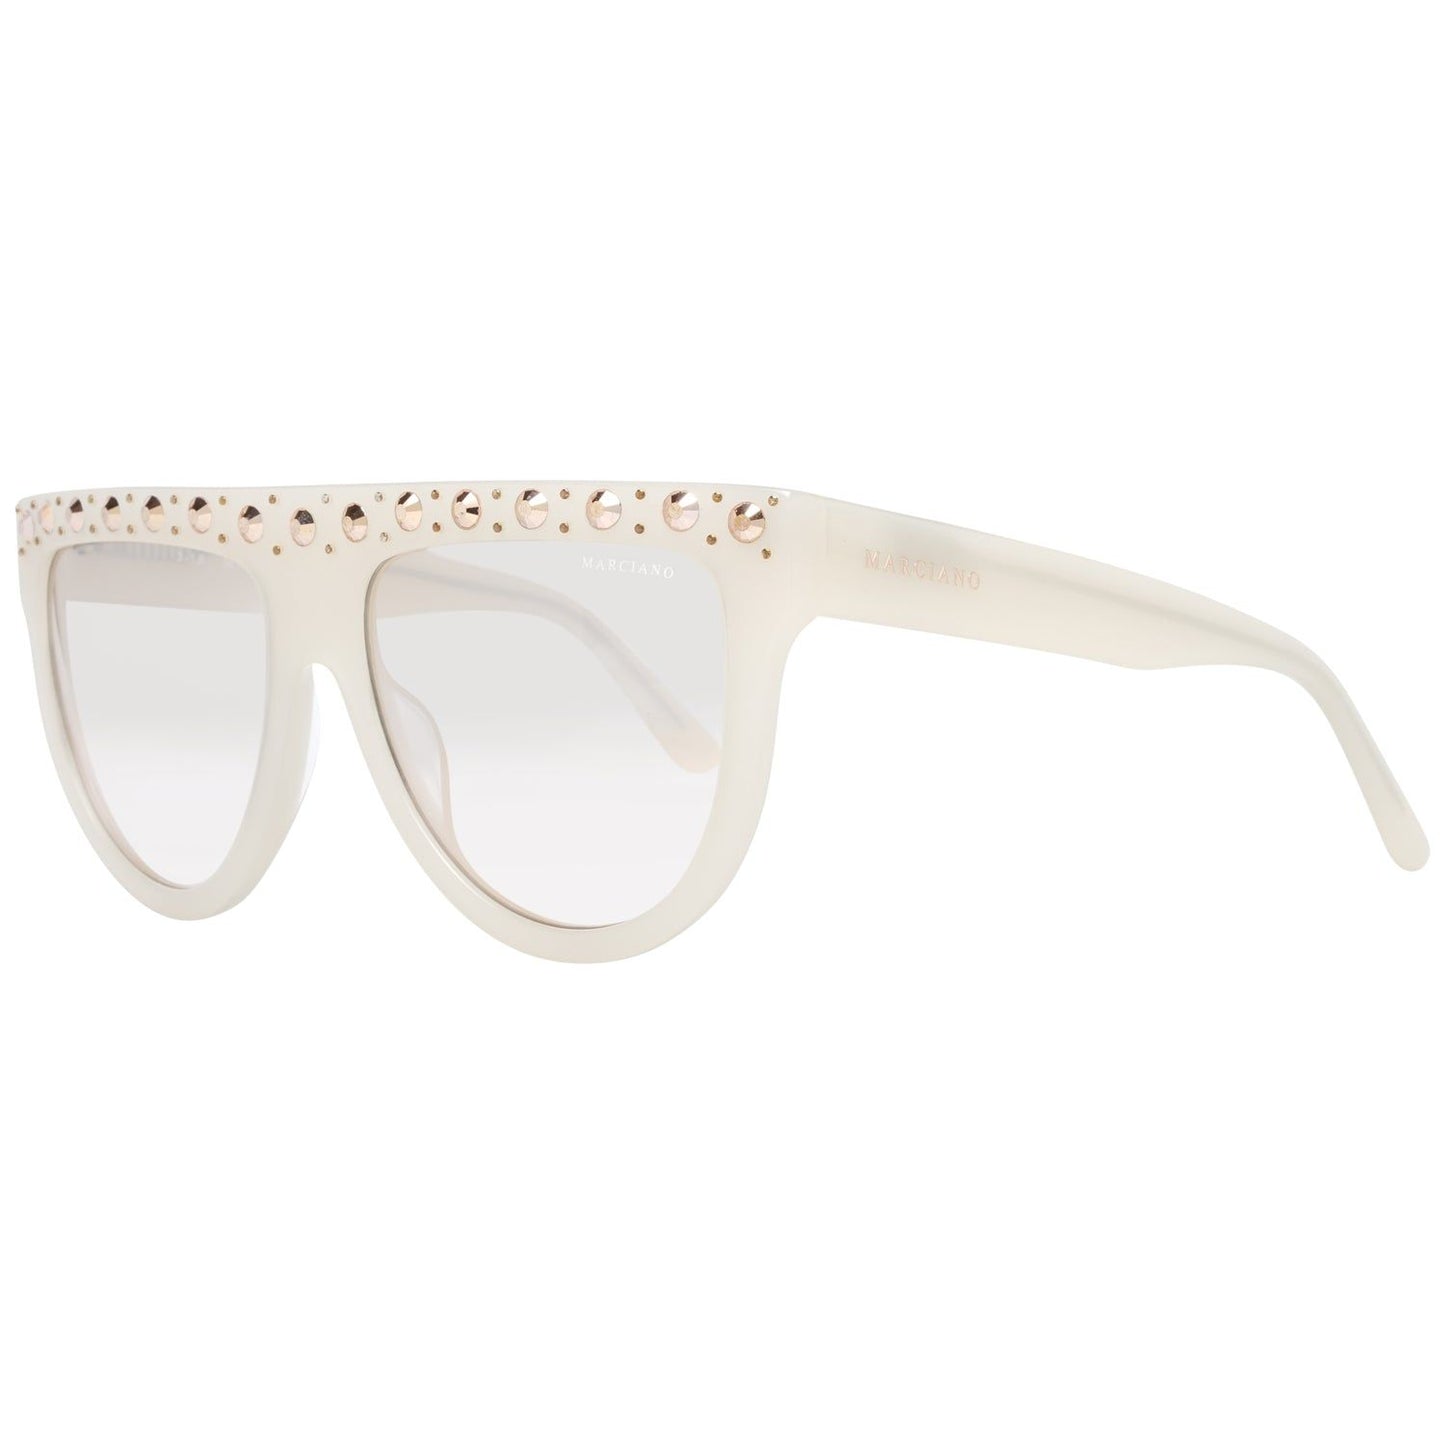 MARCIANO By GUESS SUNGLASSES MARCIANO BY GUESS MOD. GM0795 5625F SUNGLASSES & EYEWEAR marciano-by-guess-mod-gm0795-5625f